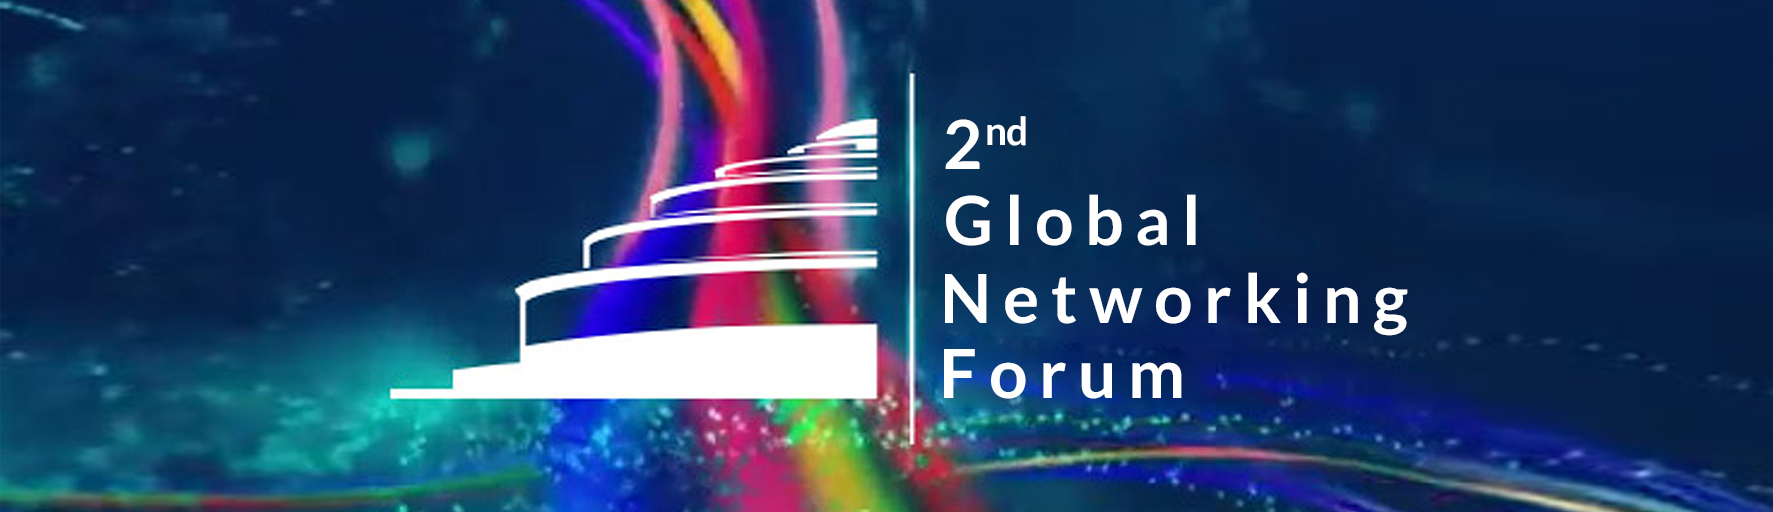 2nd Global Networking Forum, Wroclaw 2017 